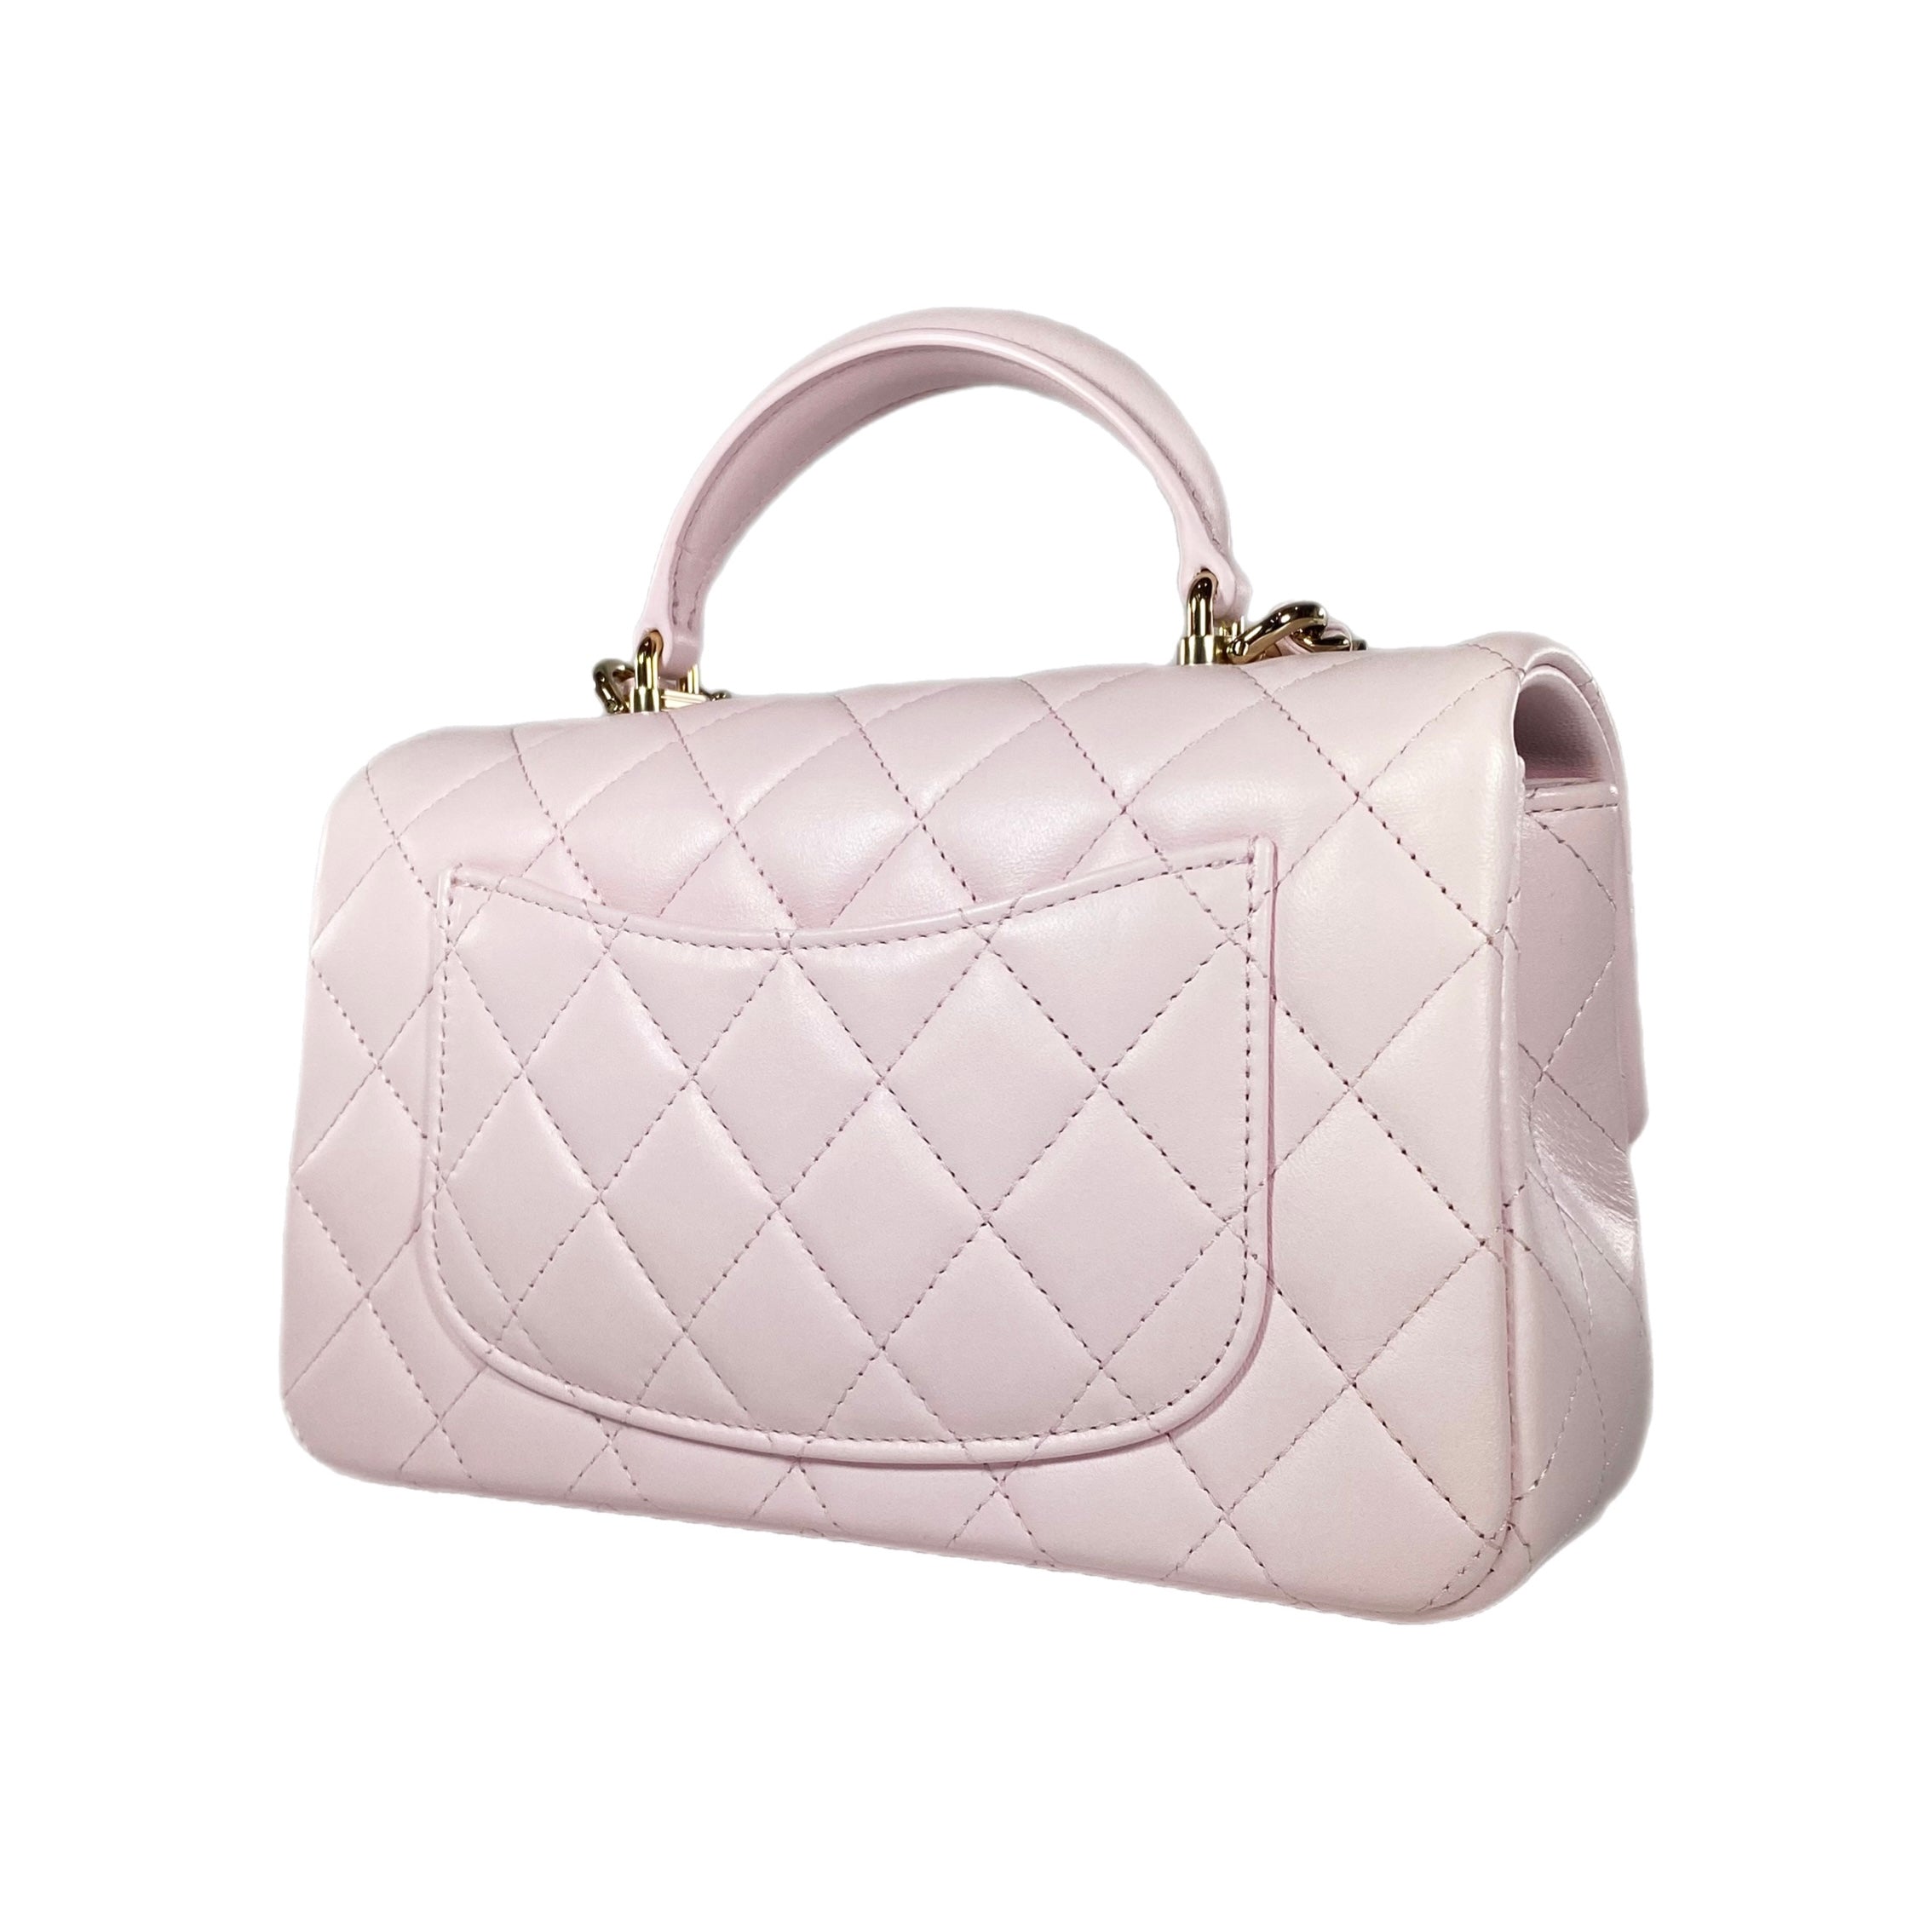 classic chanel flap bag small pink